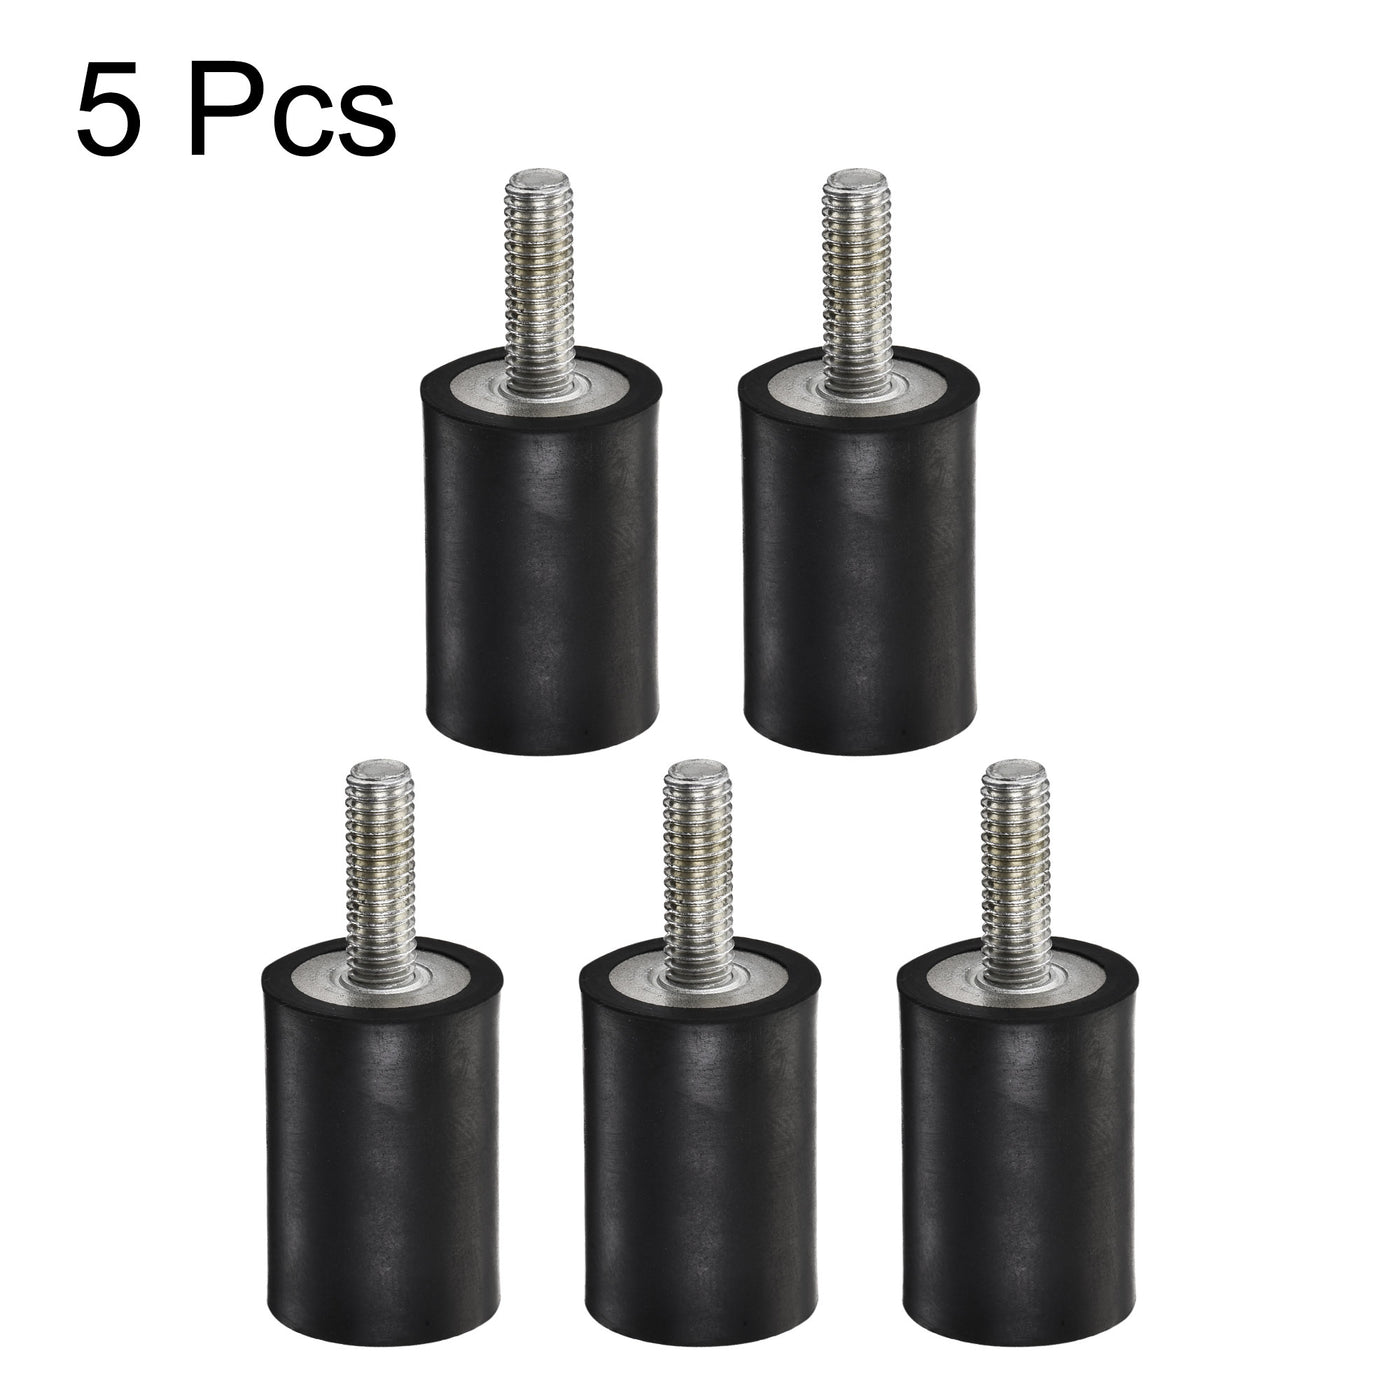 uxcell Uxcell M6 Rubber Mounts, 5pcs Male/Female Shock Absorber, D20mmxH30mm